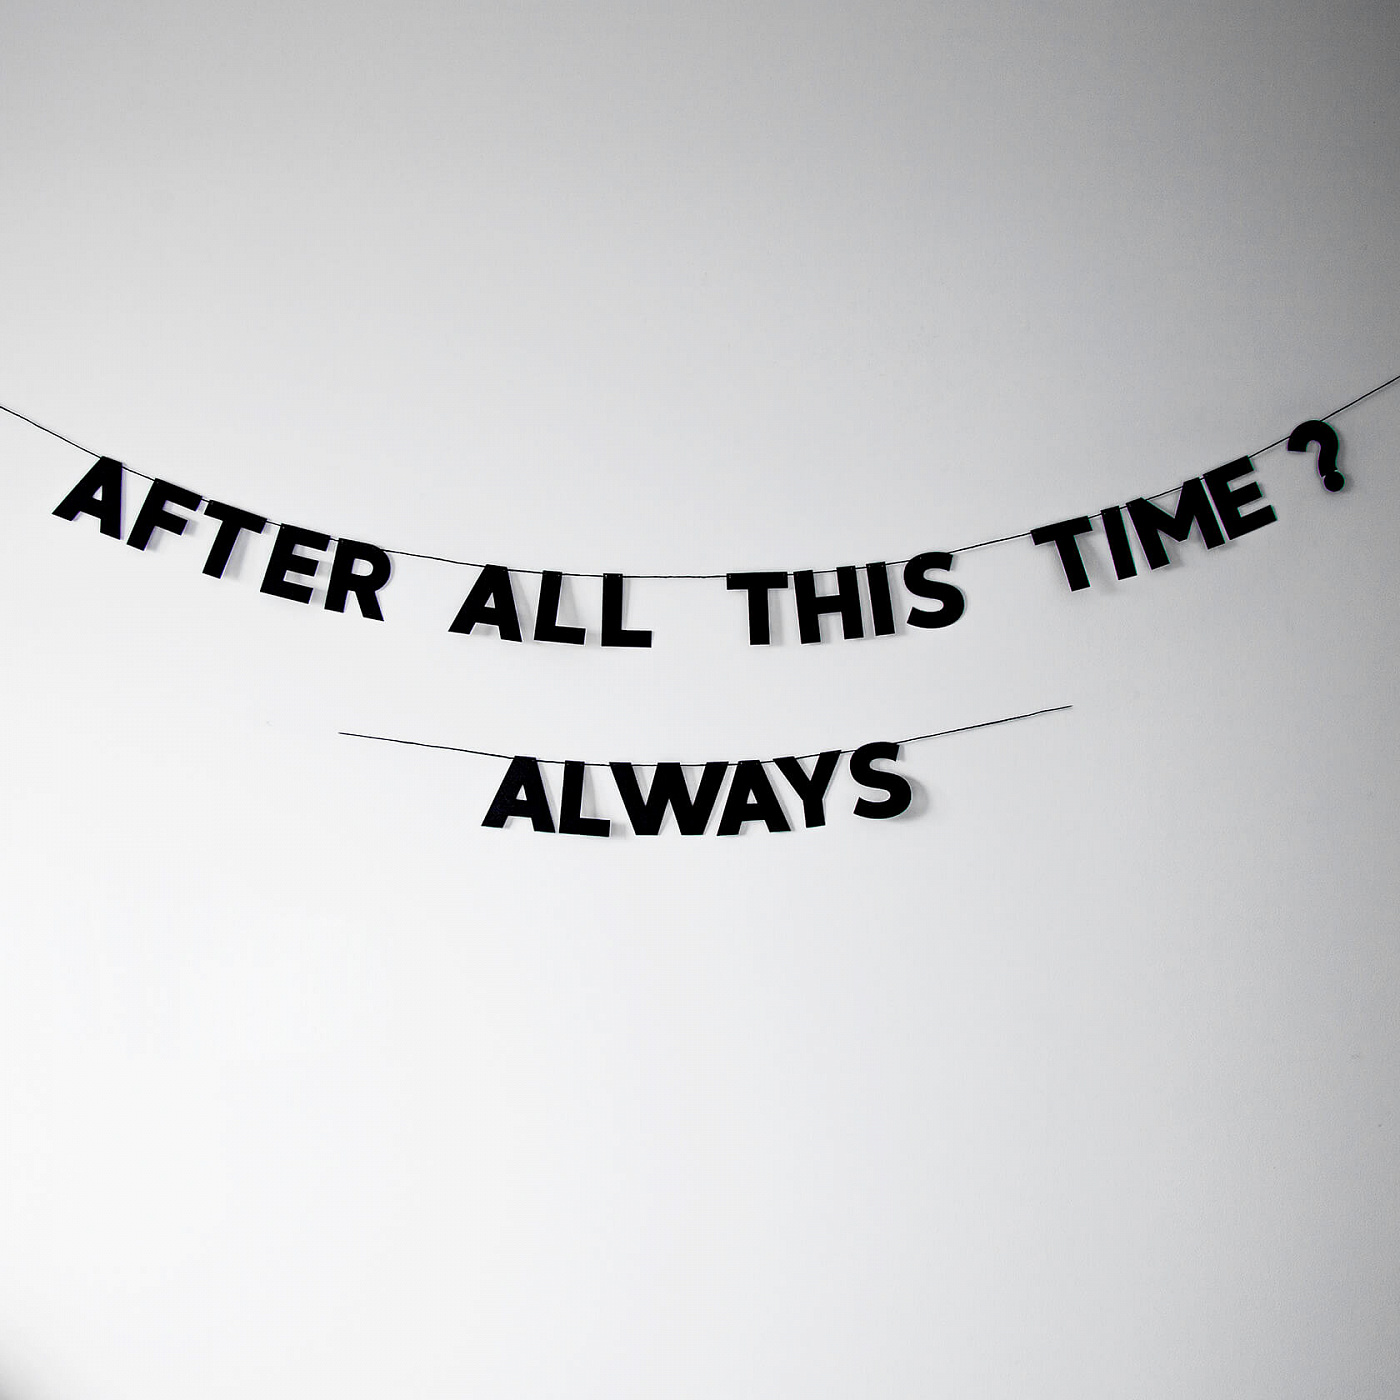  AFTER ALL THIS TIME? ALWAYS